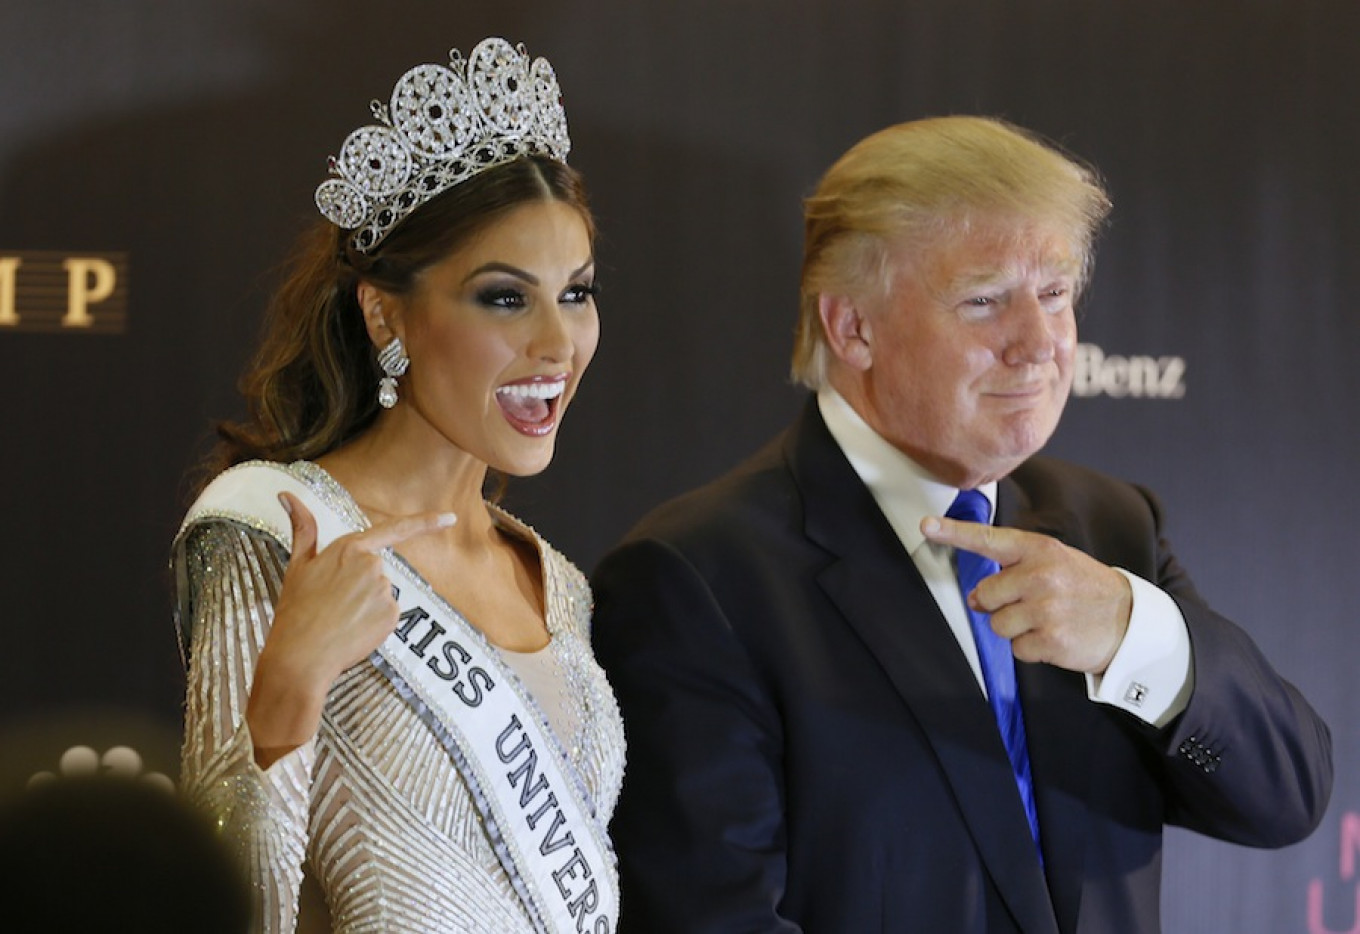 
					Miss Universe 2013 Gabriela Isler and Donald Trump while posing for a photo after the 2013 Miss Universe pageant in Moscow, Russia, Nov. 9, 2013.					 					Ivan Sekretarev / AP				